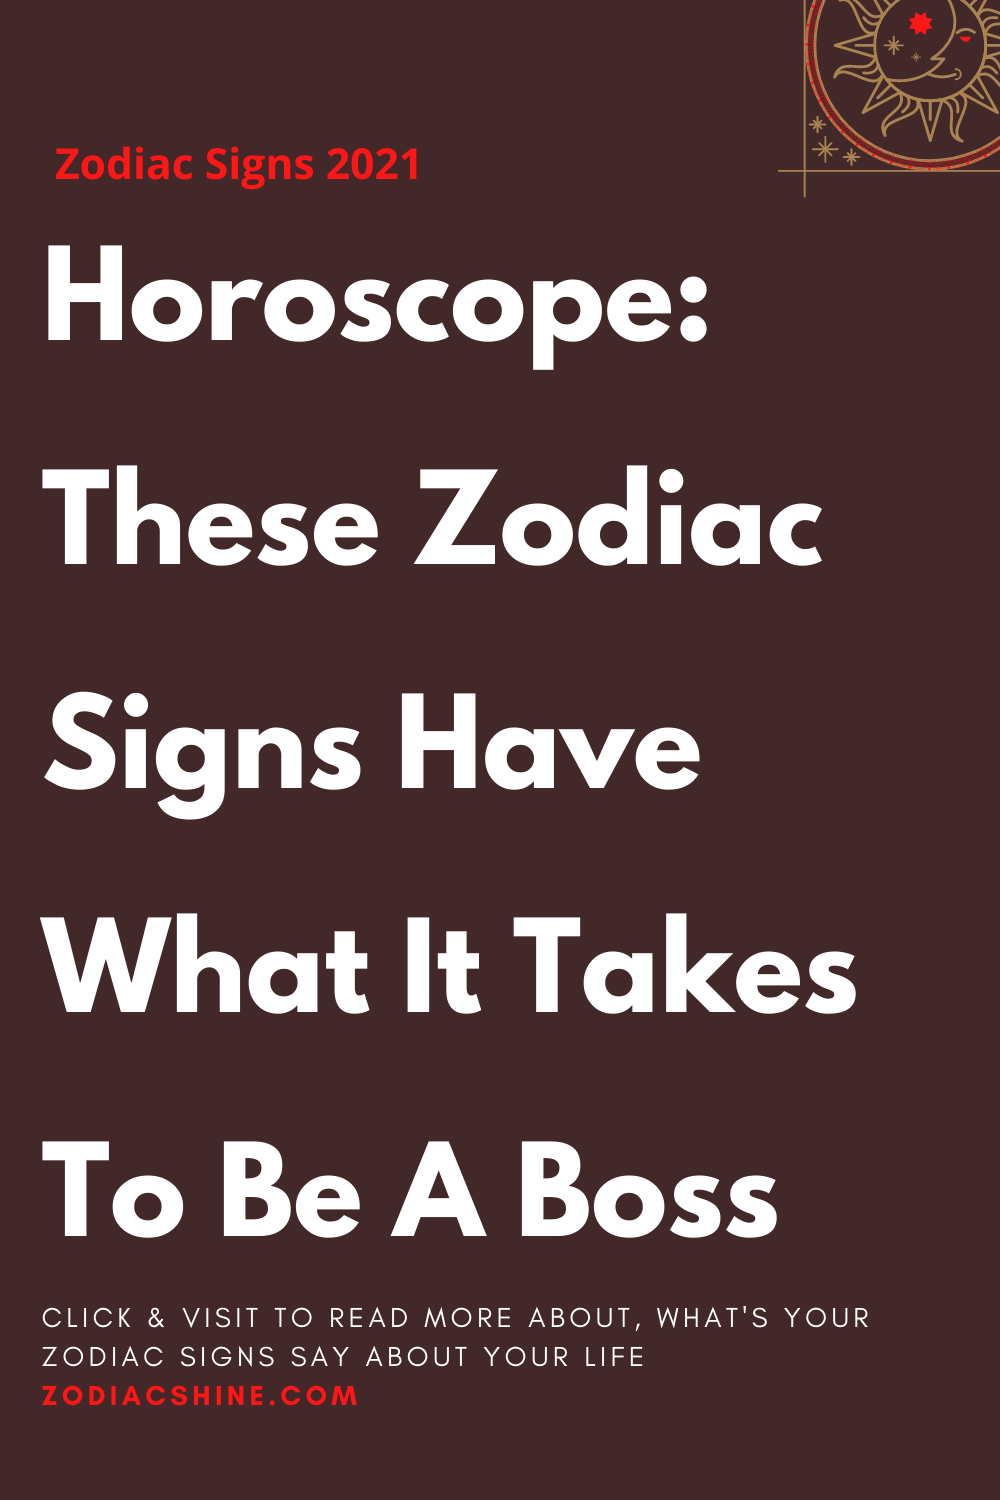 Horoscope: These zodiac signs have what it takes to be a boss